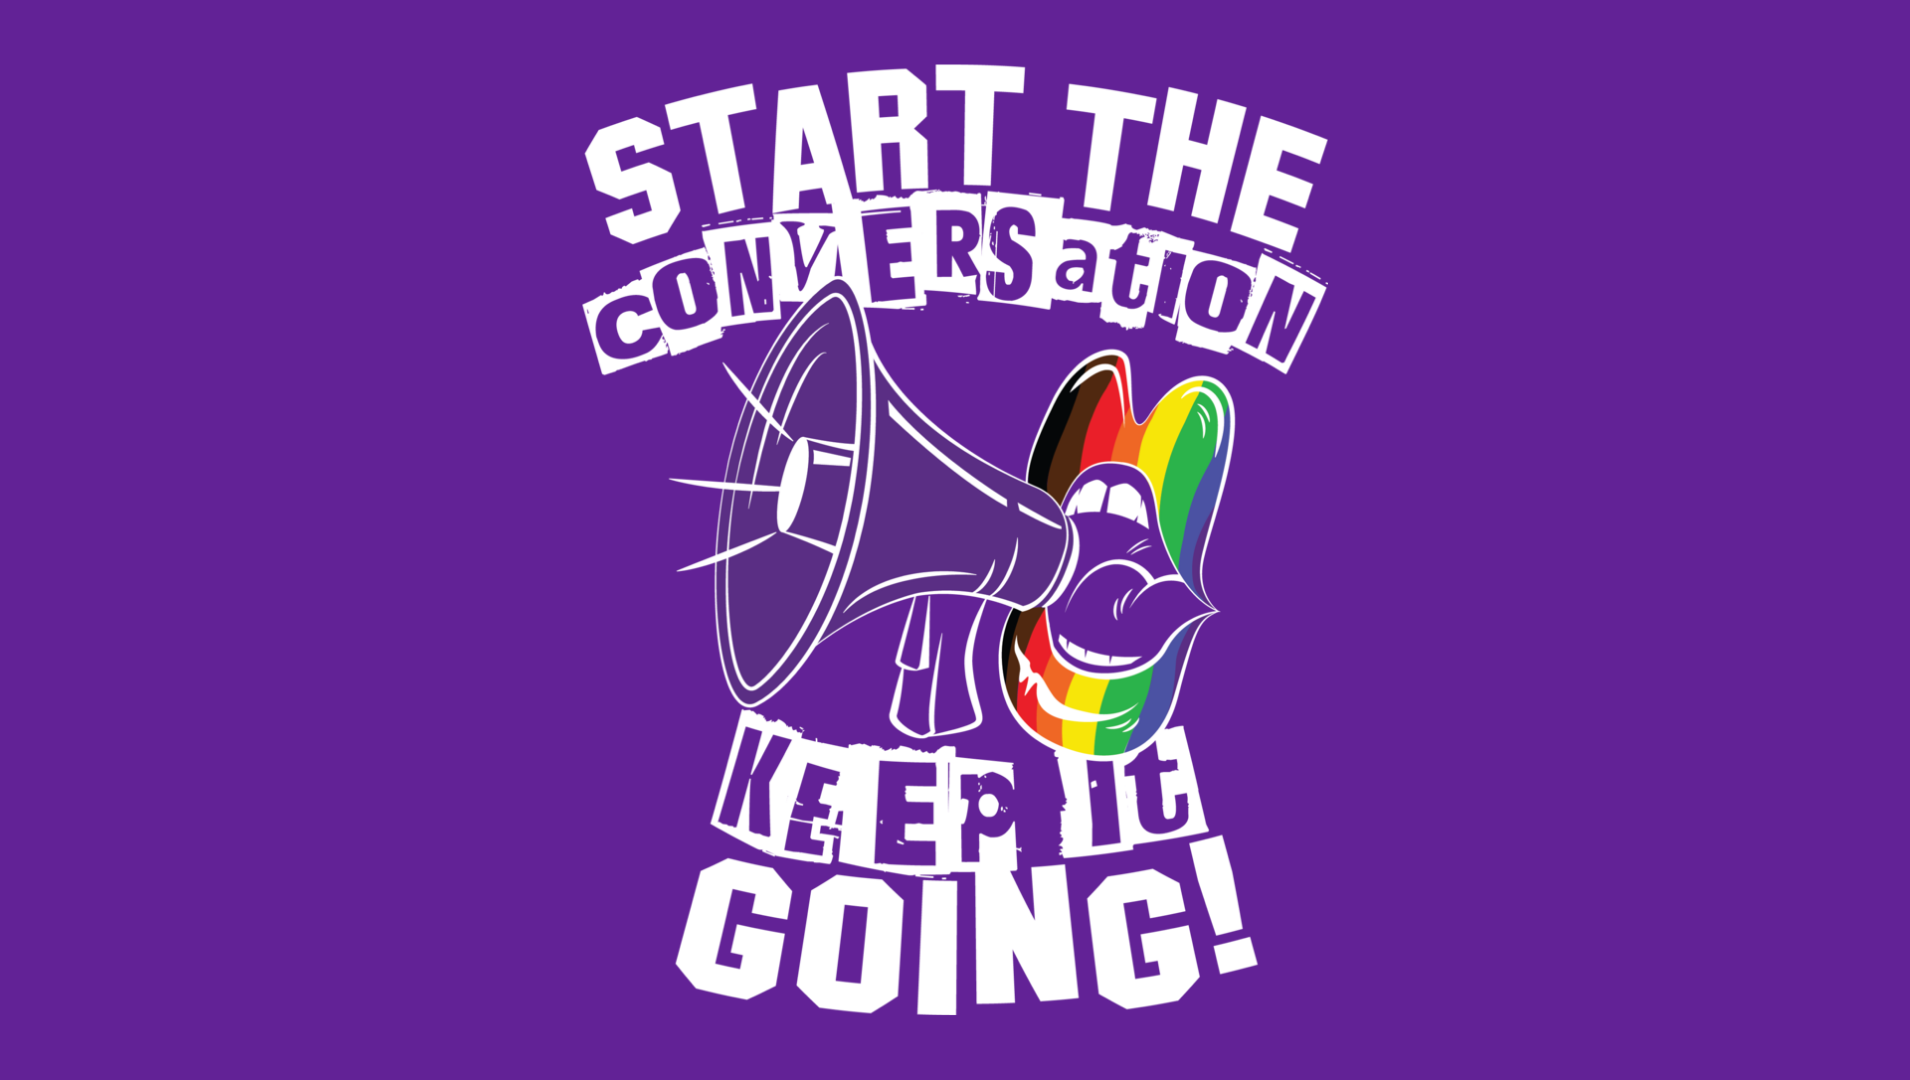 An image with the words "Start the conversation, keep it going!"